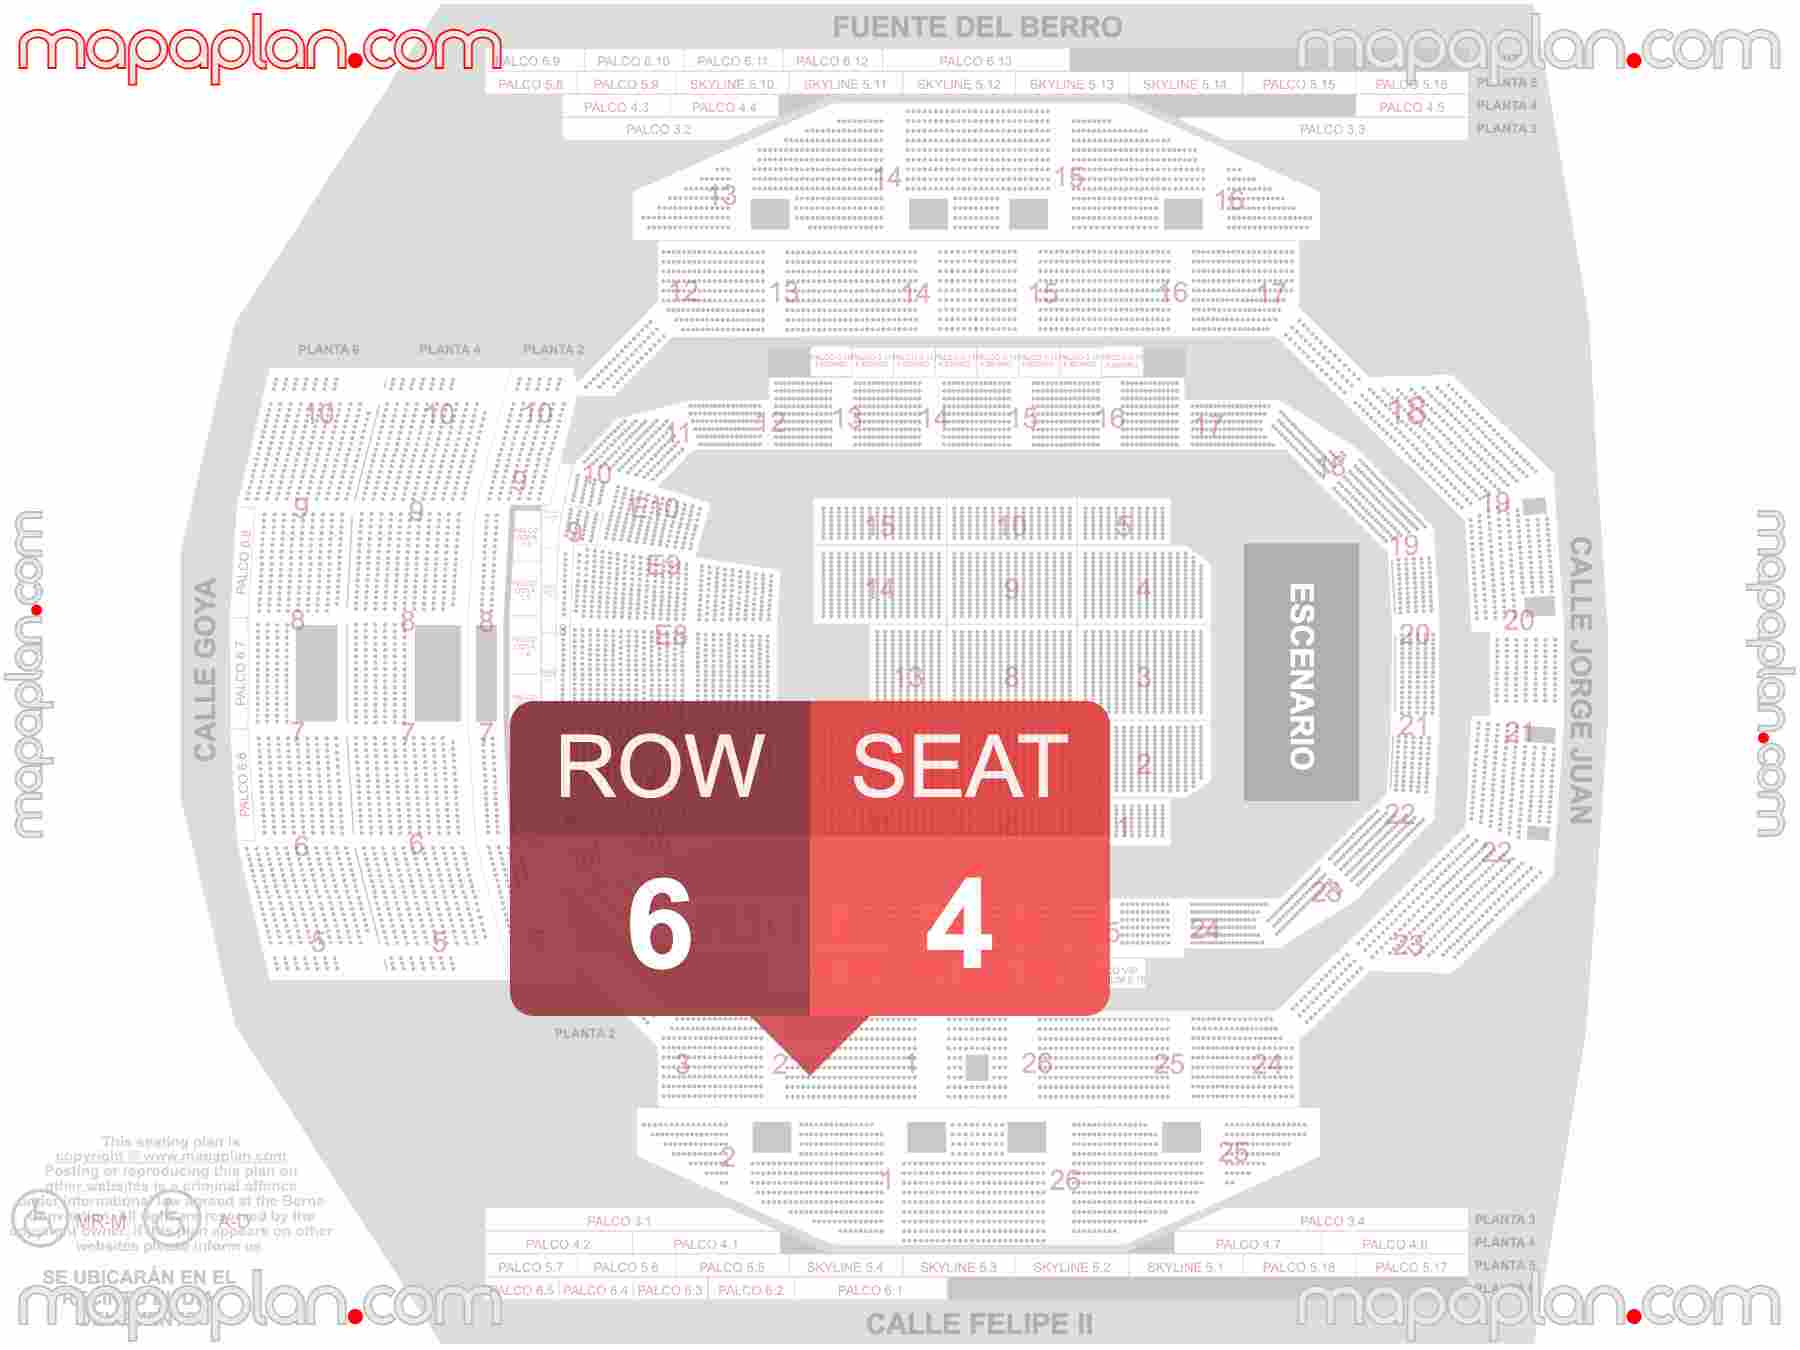 Madrid WiZink Center seating map Concert (Conciertos mapa de asientos) detailed seat numbers and row numbering map with interactive map plan layout